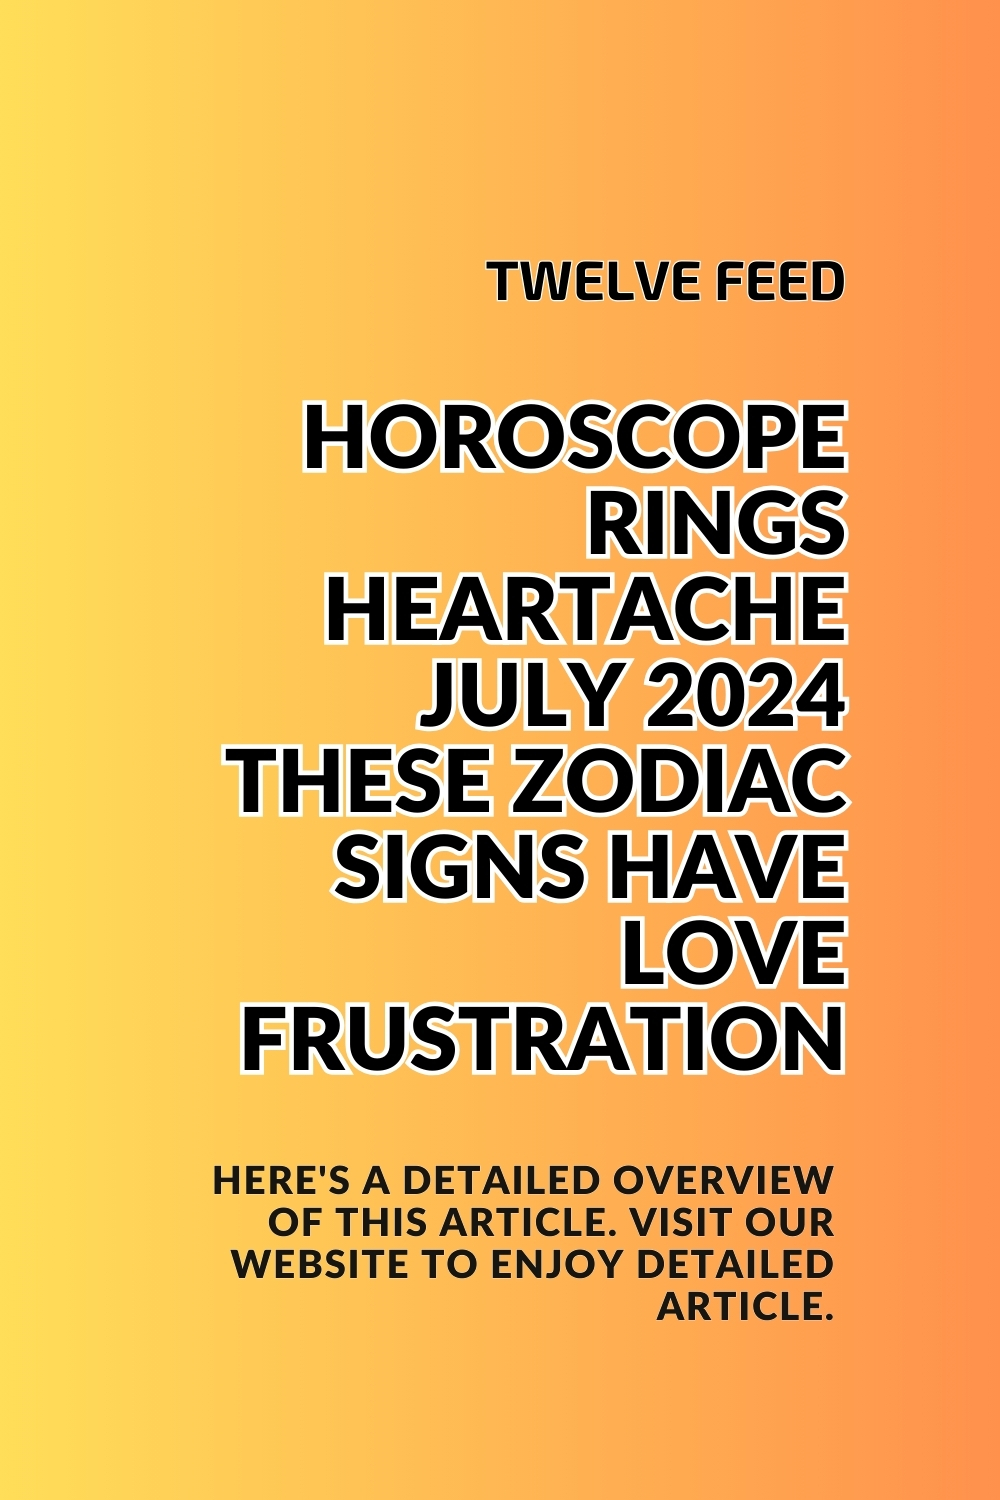 Horoscope Brings Heartache July 2024 - These Zodiac Signs Have Love Frustration